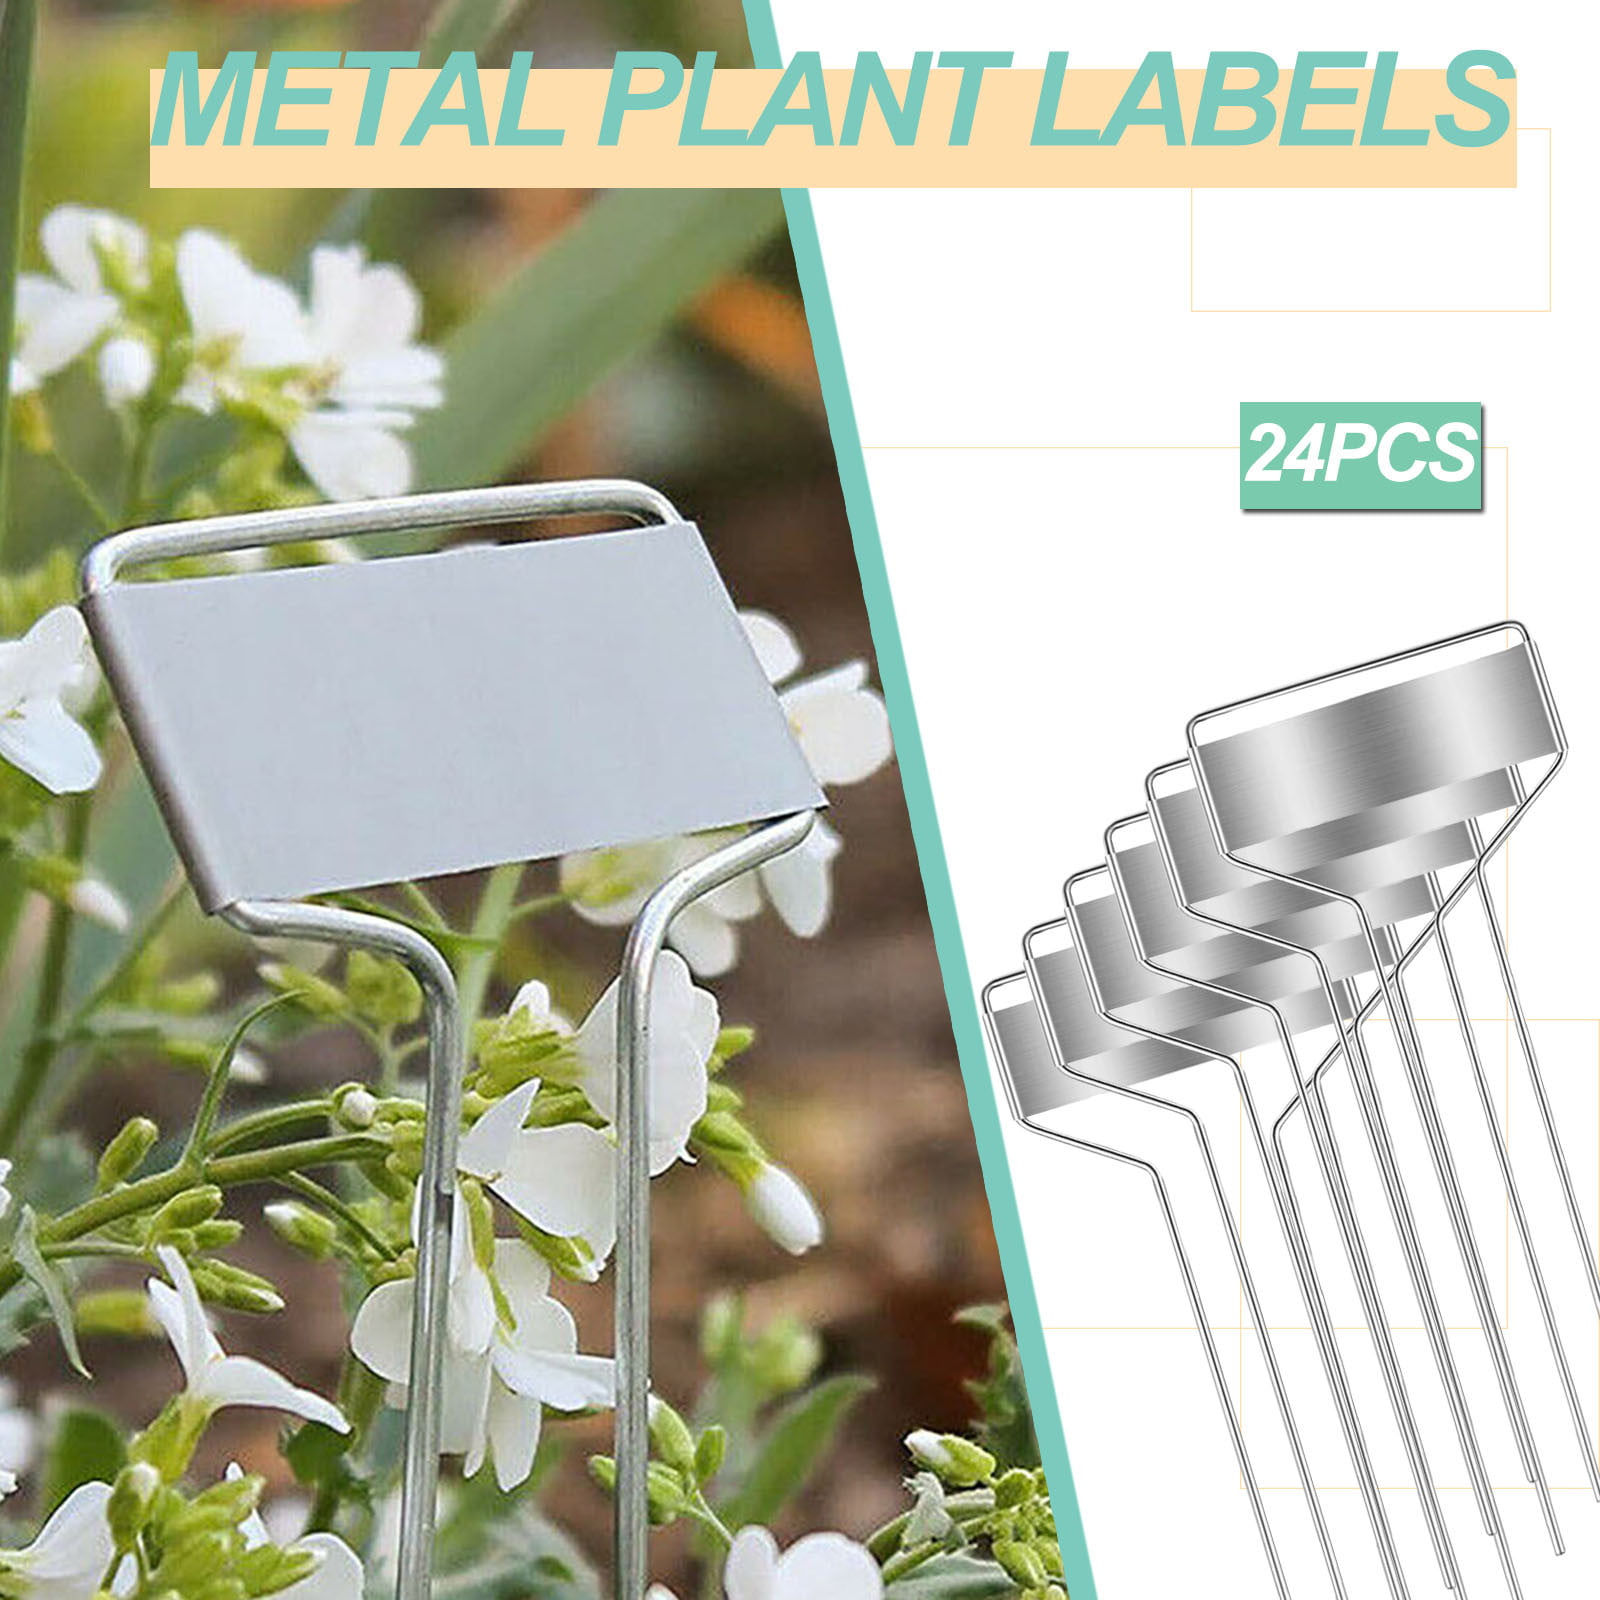 Wehhbtye 40 PCS Metal Plant Label Stakes Copper Metal Plant Tags,High Copper Plate Metal Plant Labels,Copper Plant Tags with 1 Maker Pen for Flowers Seedlings Vegetables Seed,etc 